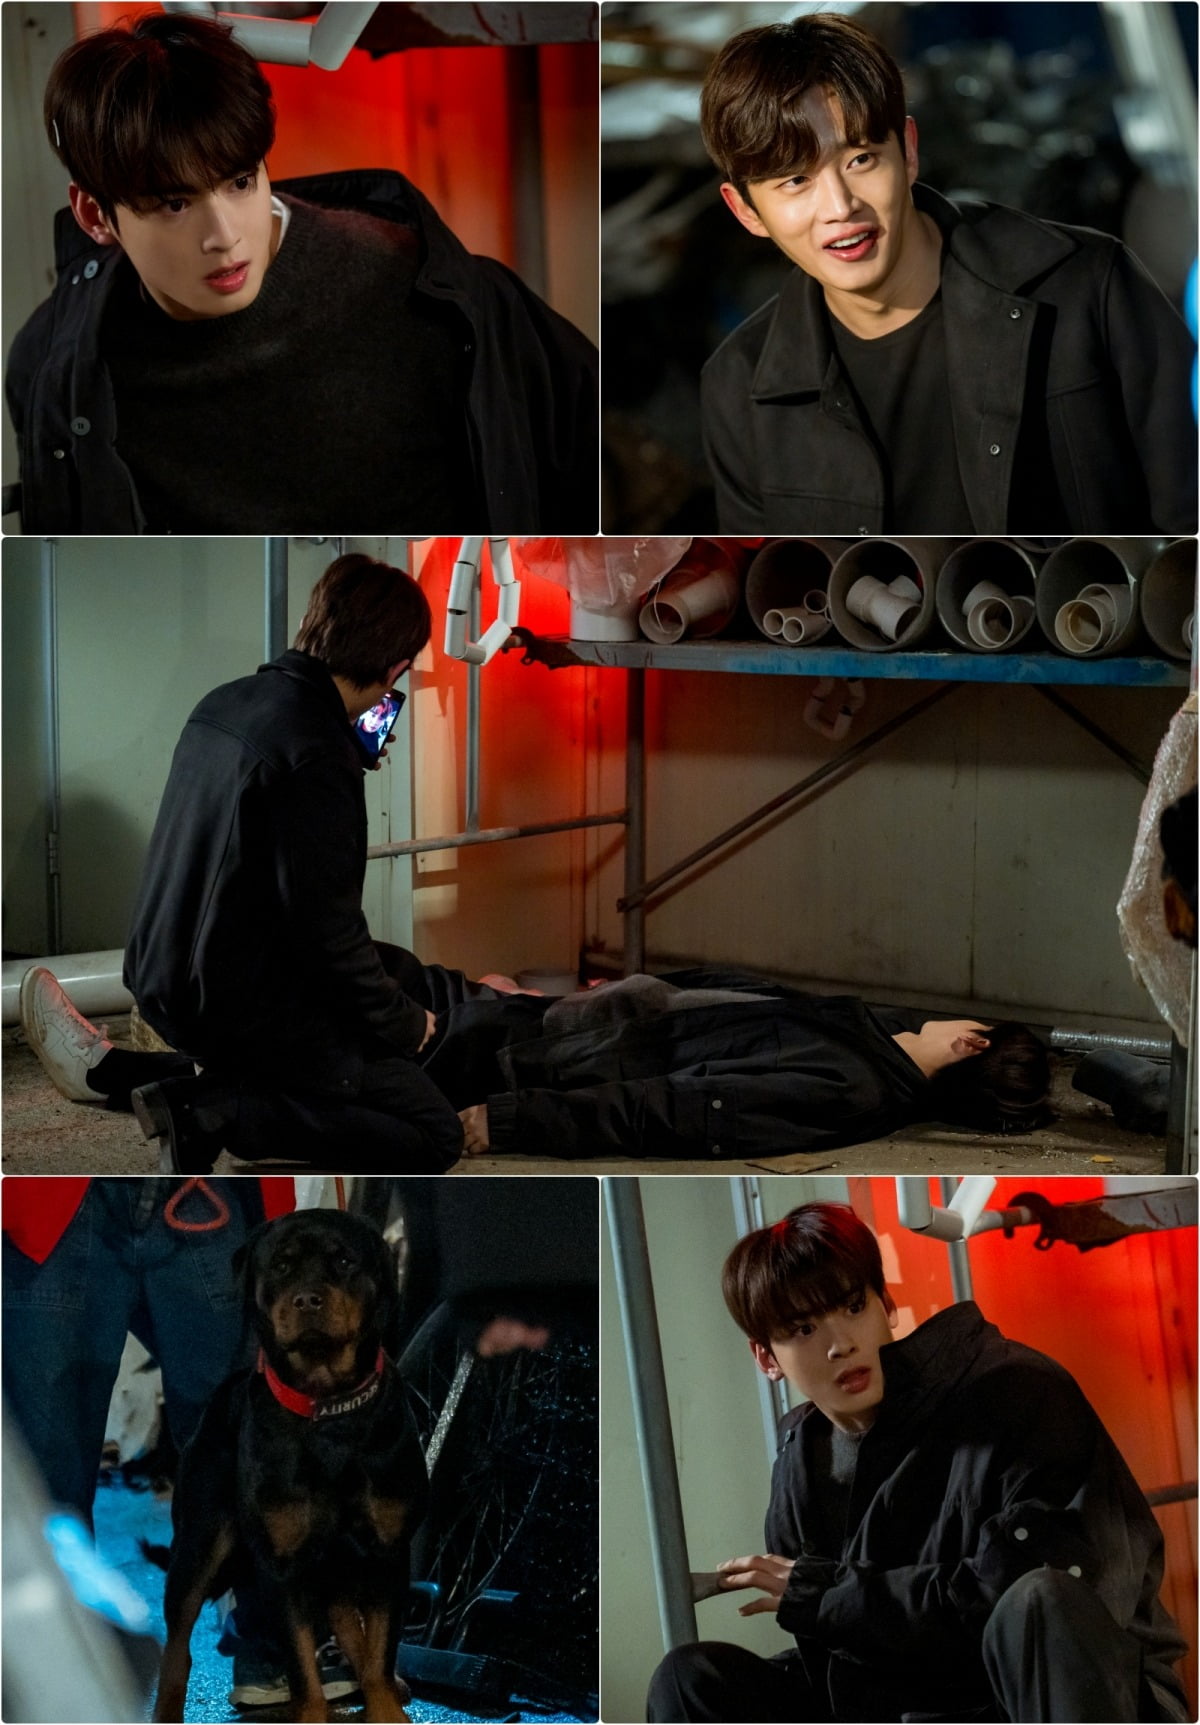 Cha Eunwoo falls unconscious and faces the worst situation.